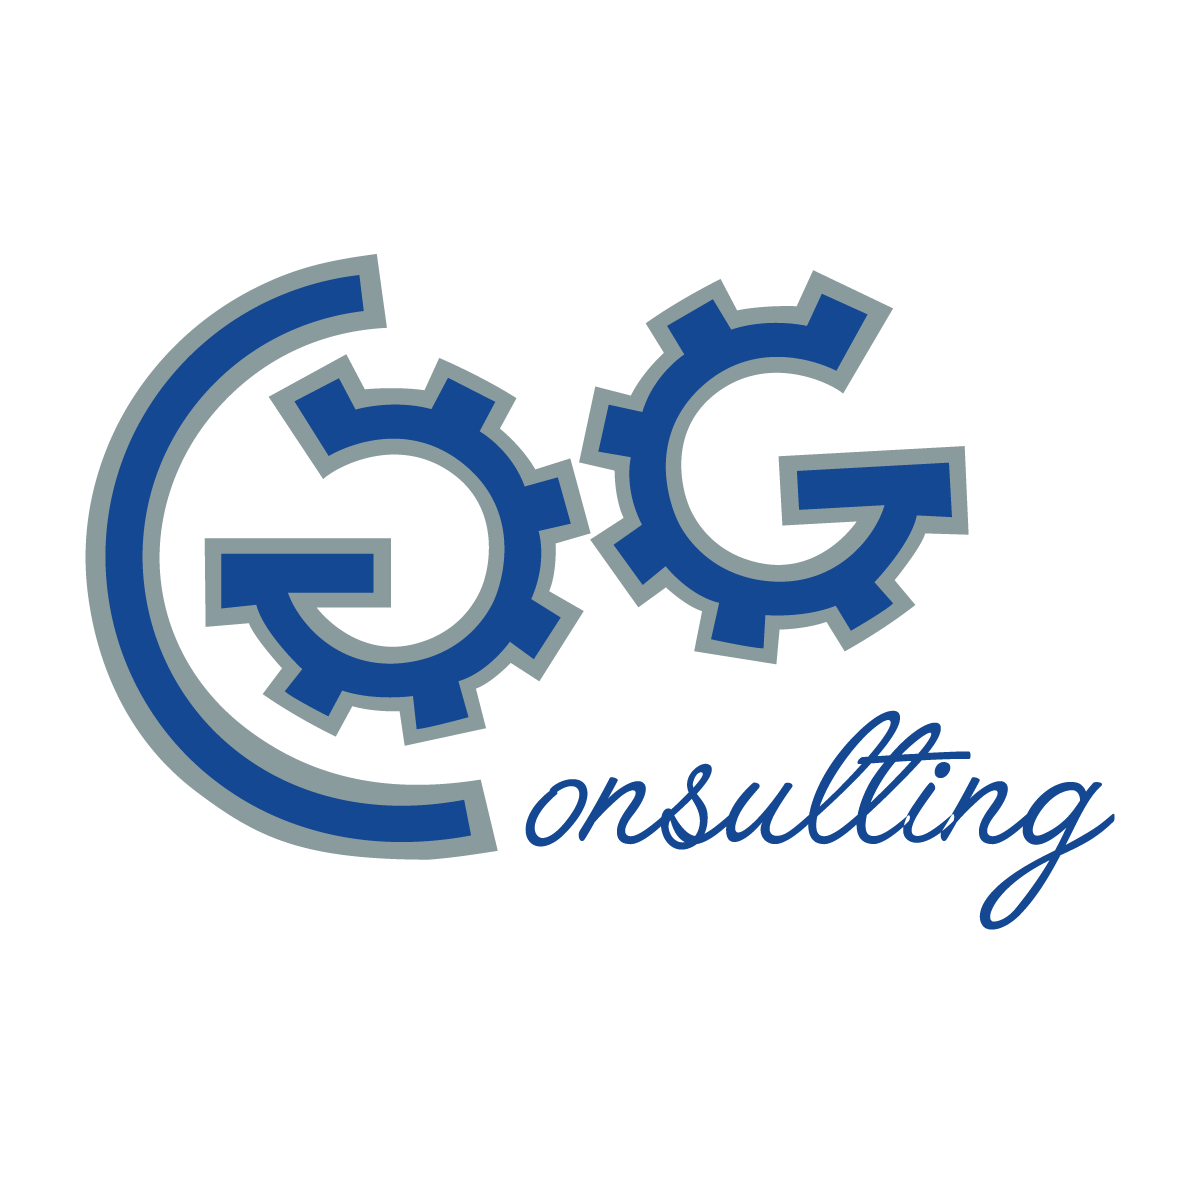 GG CONSULTING